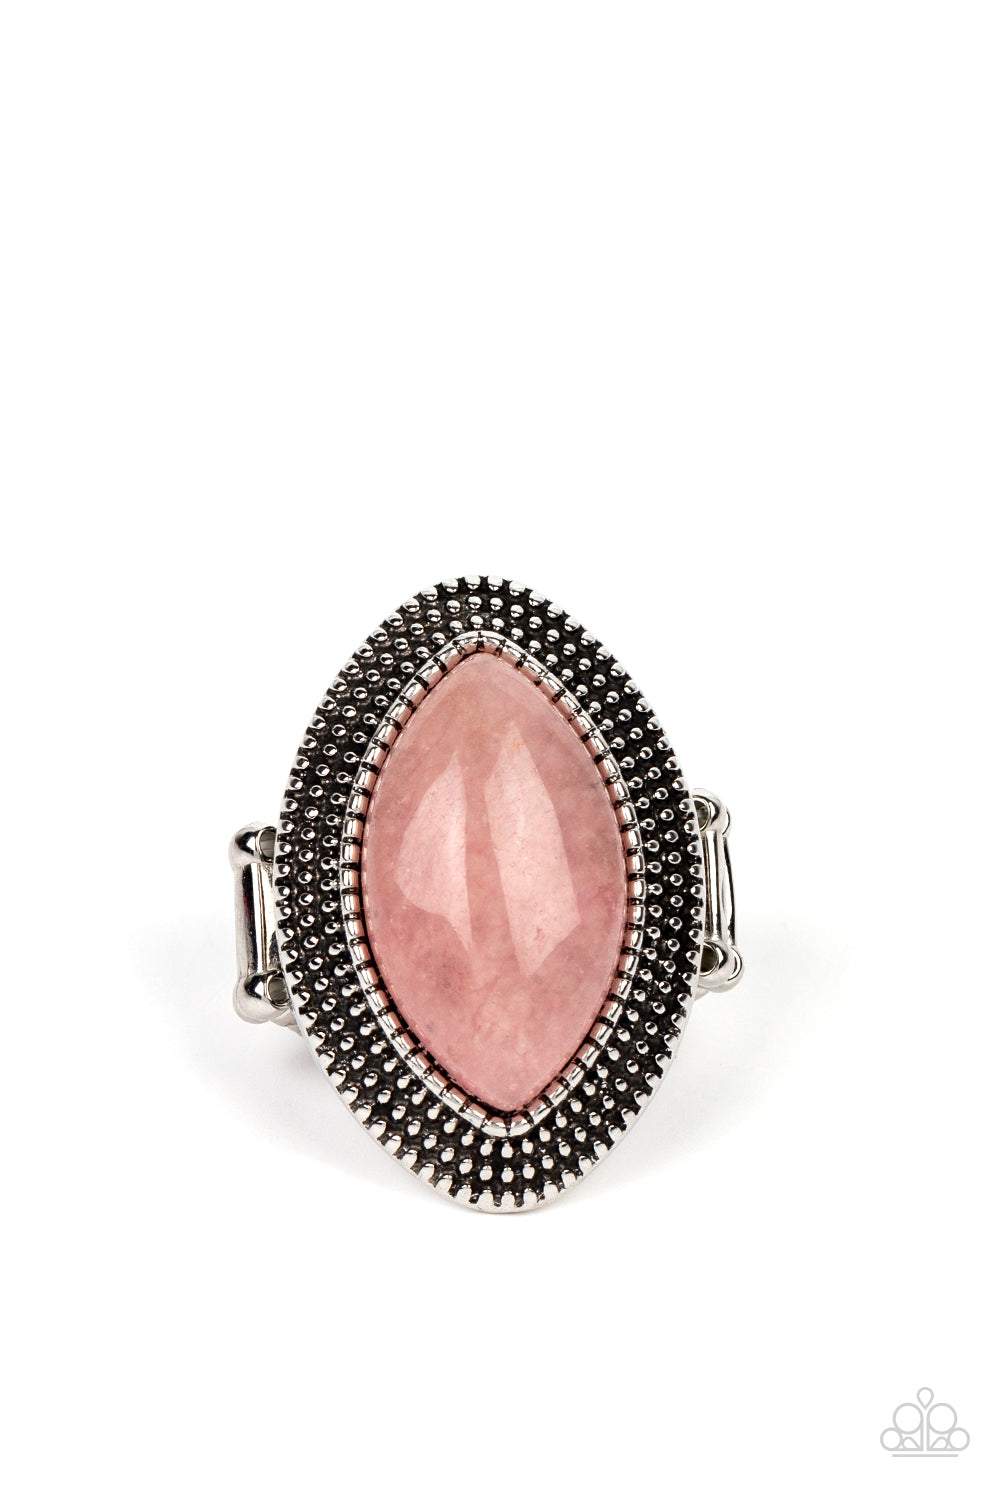 Artisanal Apothecary Paparazzi Accessories Ring Pink